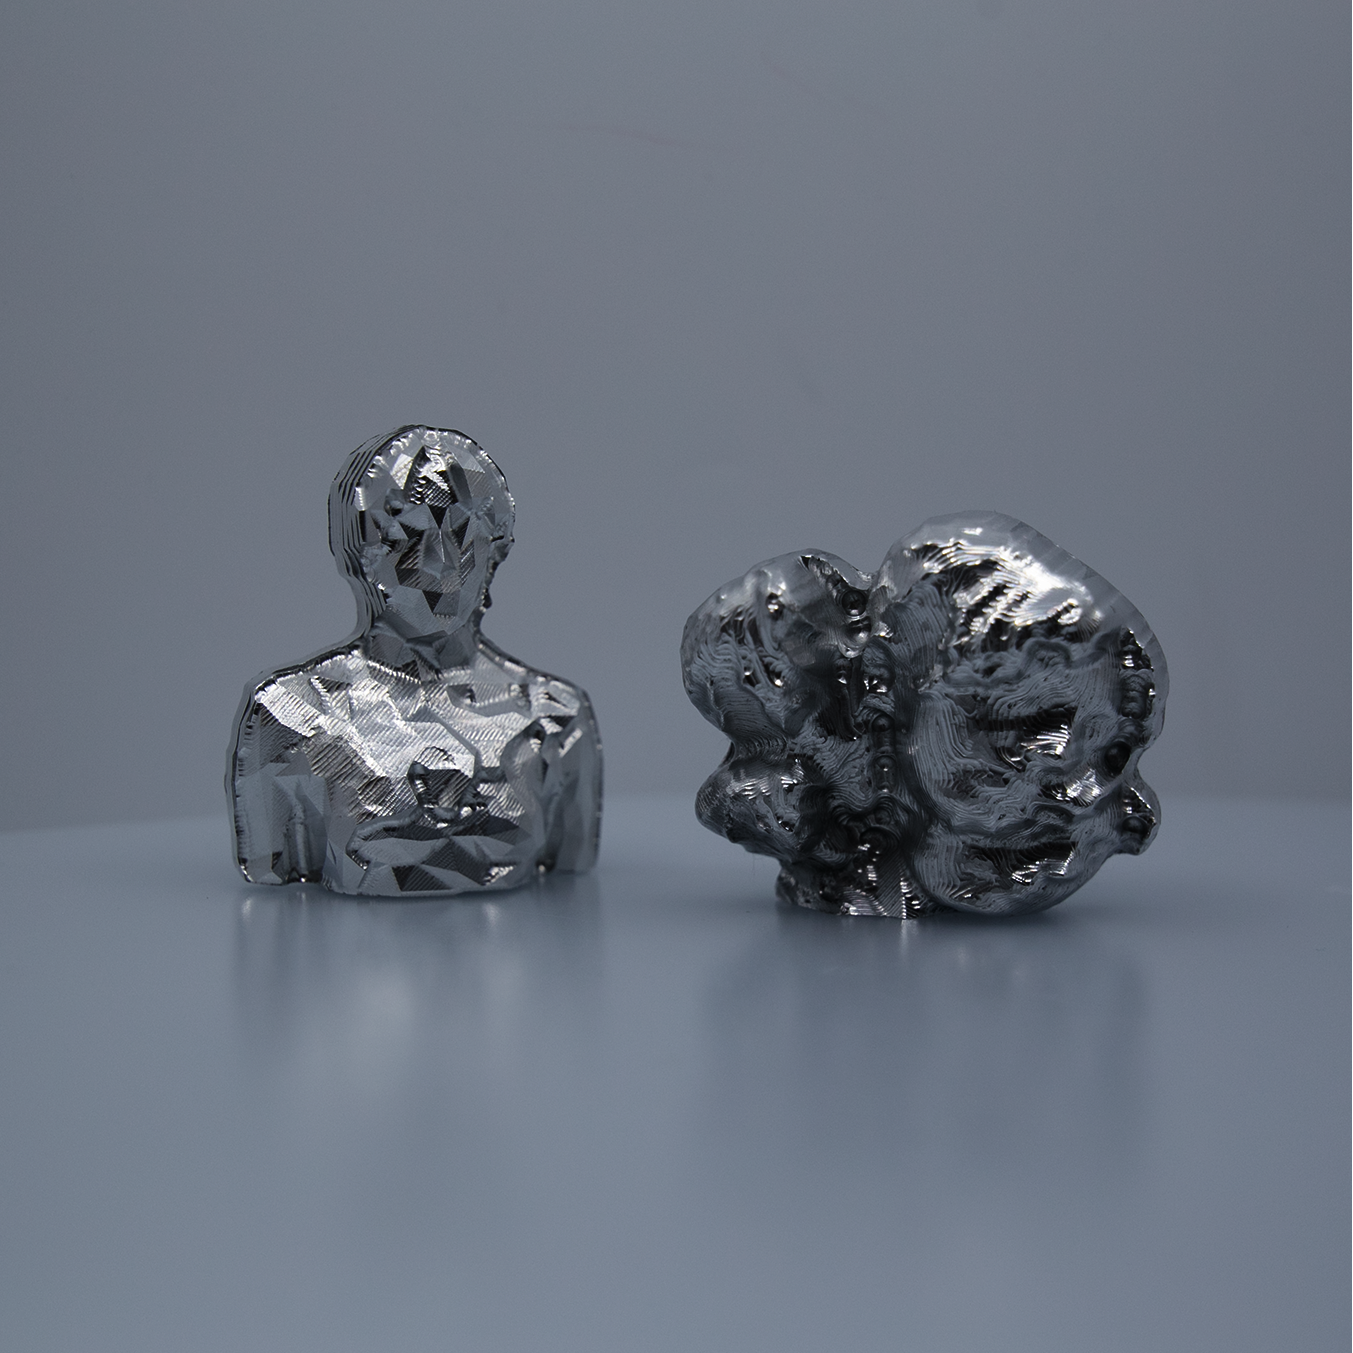 Two small metal sculptures sit next to each other.